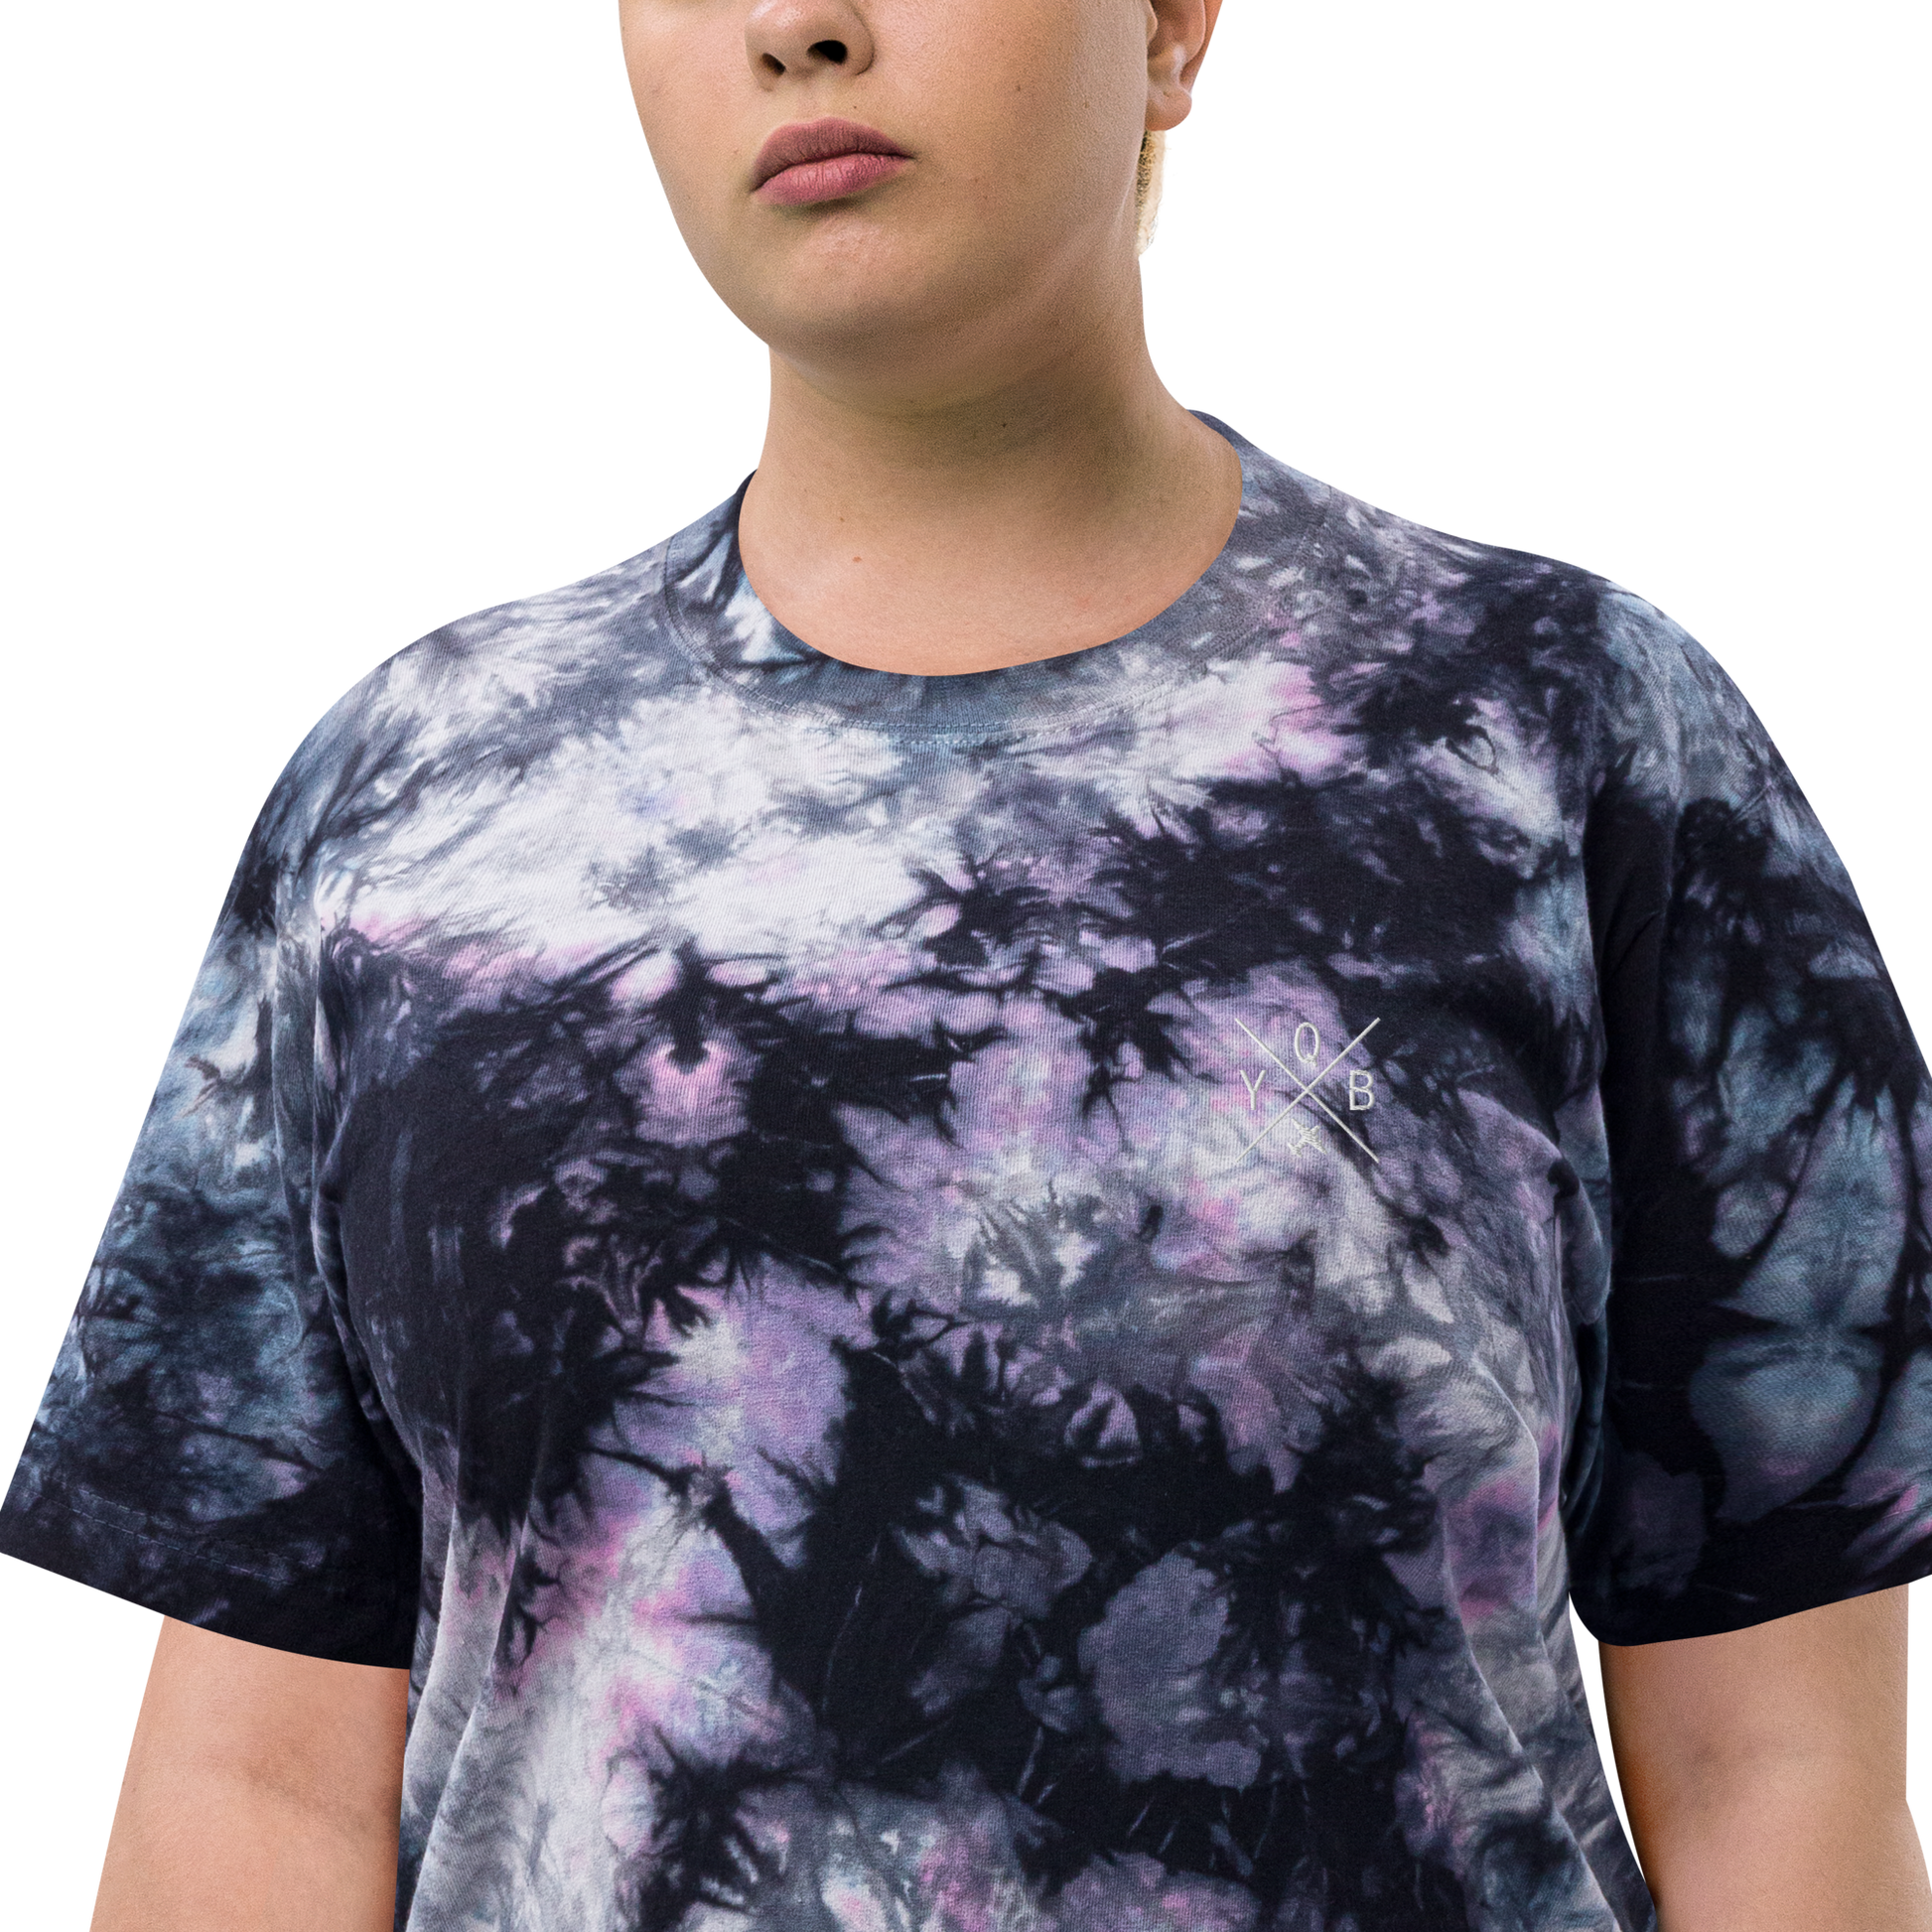 Crossed-X Oversized Tie-Dye T-Shirt • YQB Quebec City • YHM Designs - Image 07